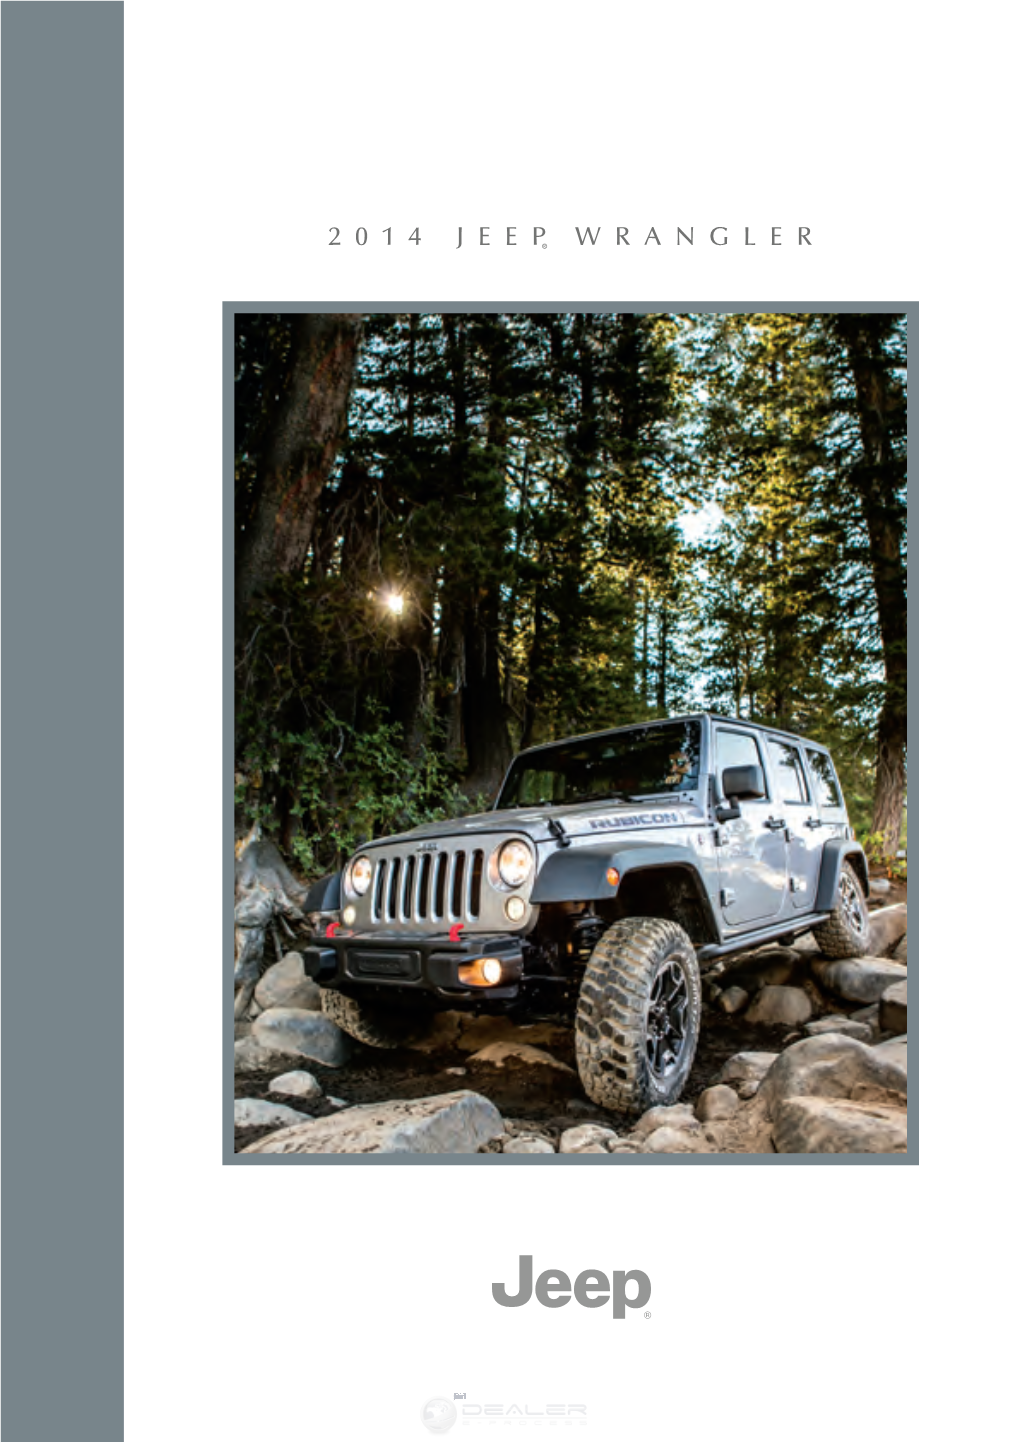 2014 Jeep Wrangler Is a True Icon of Adventure, Crafting a Legendary Story of Adventure for More Than 70 Years